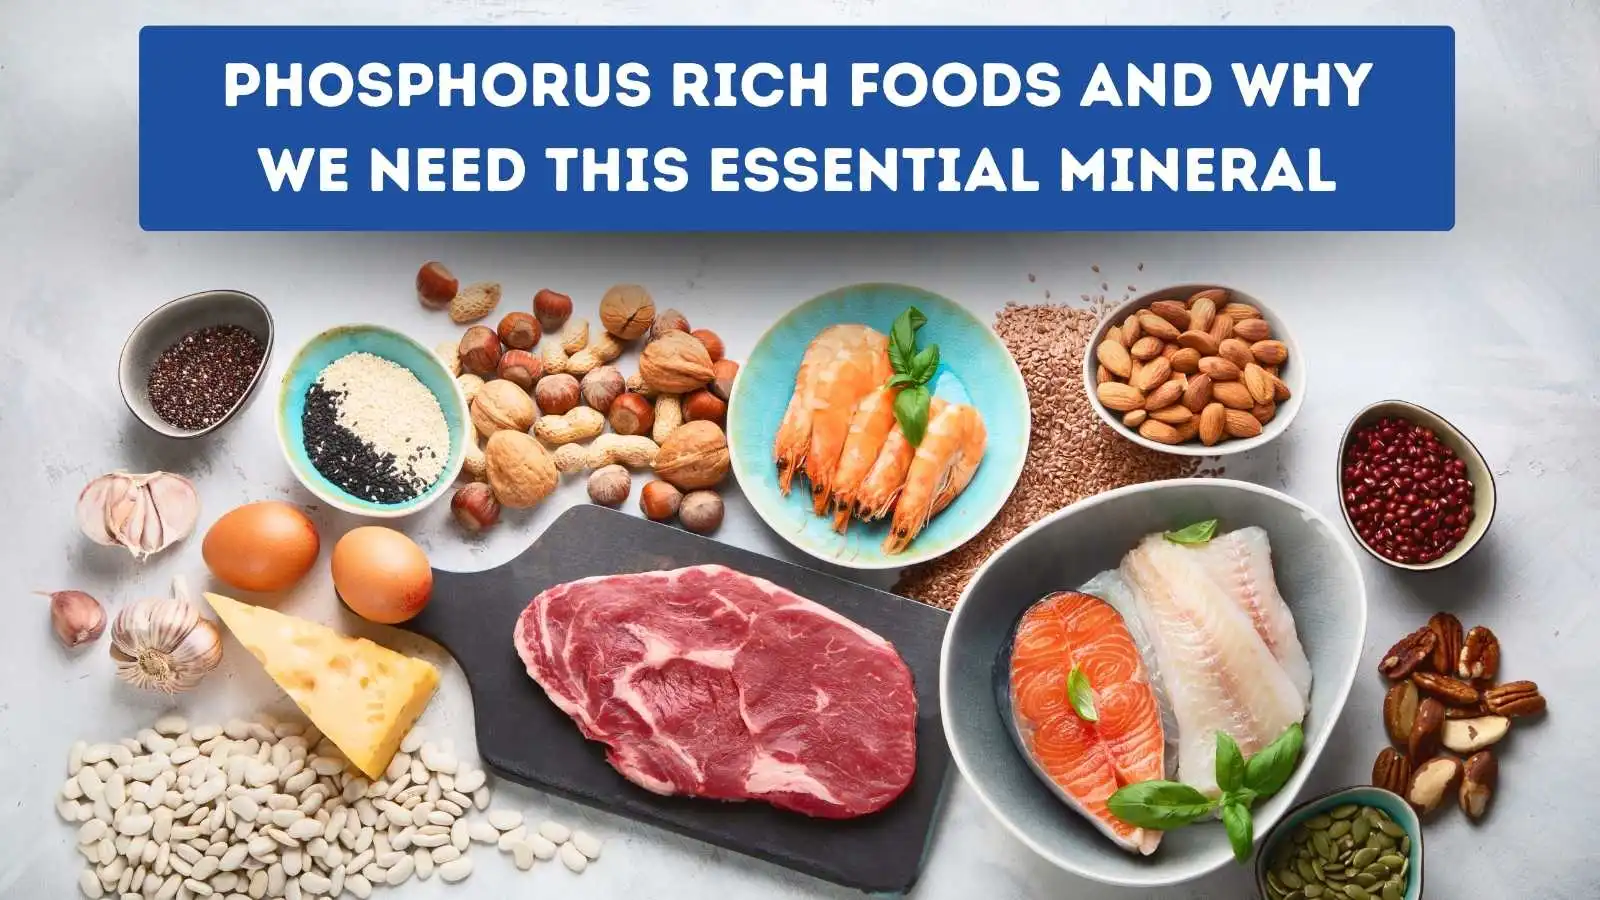 Phosphorus rich foods and why we need this essential mineral